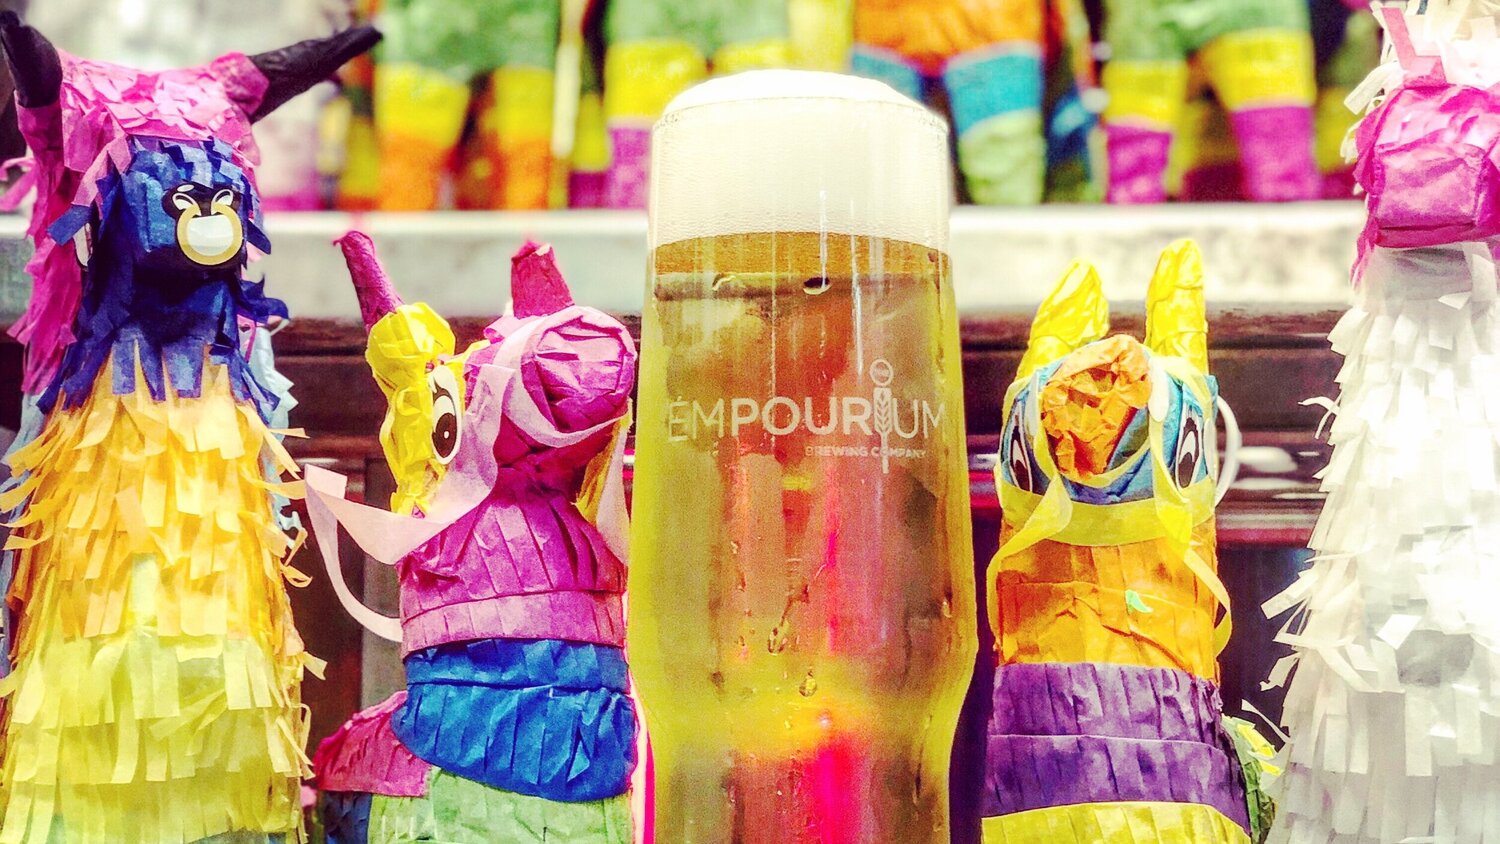 The Empourium To Release A Plethora Of Piñatas Mexican Lager For First Friday In May